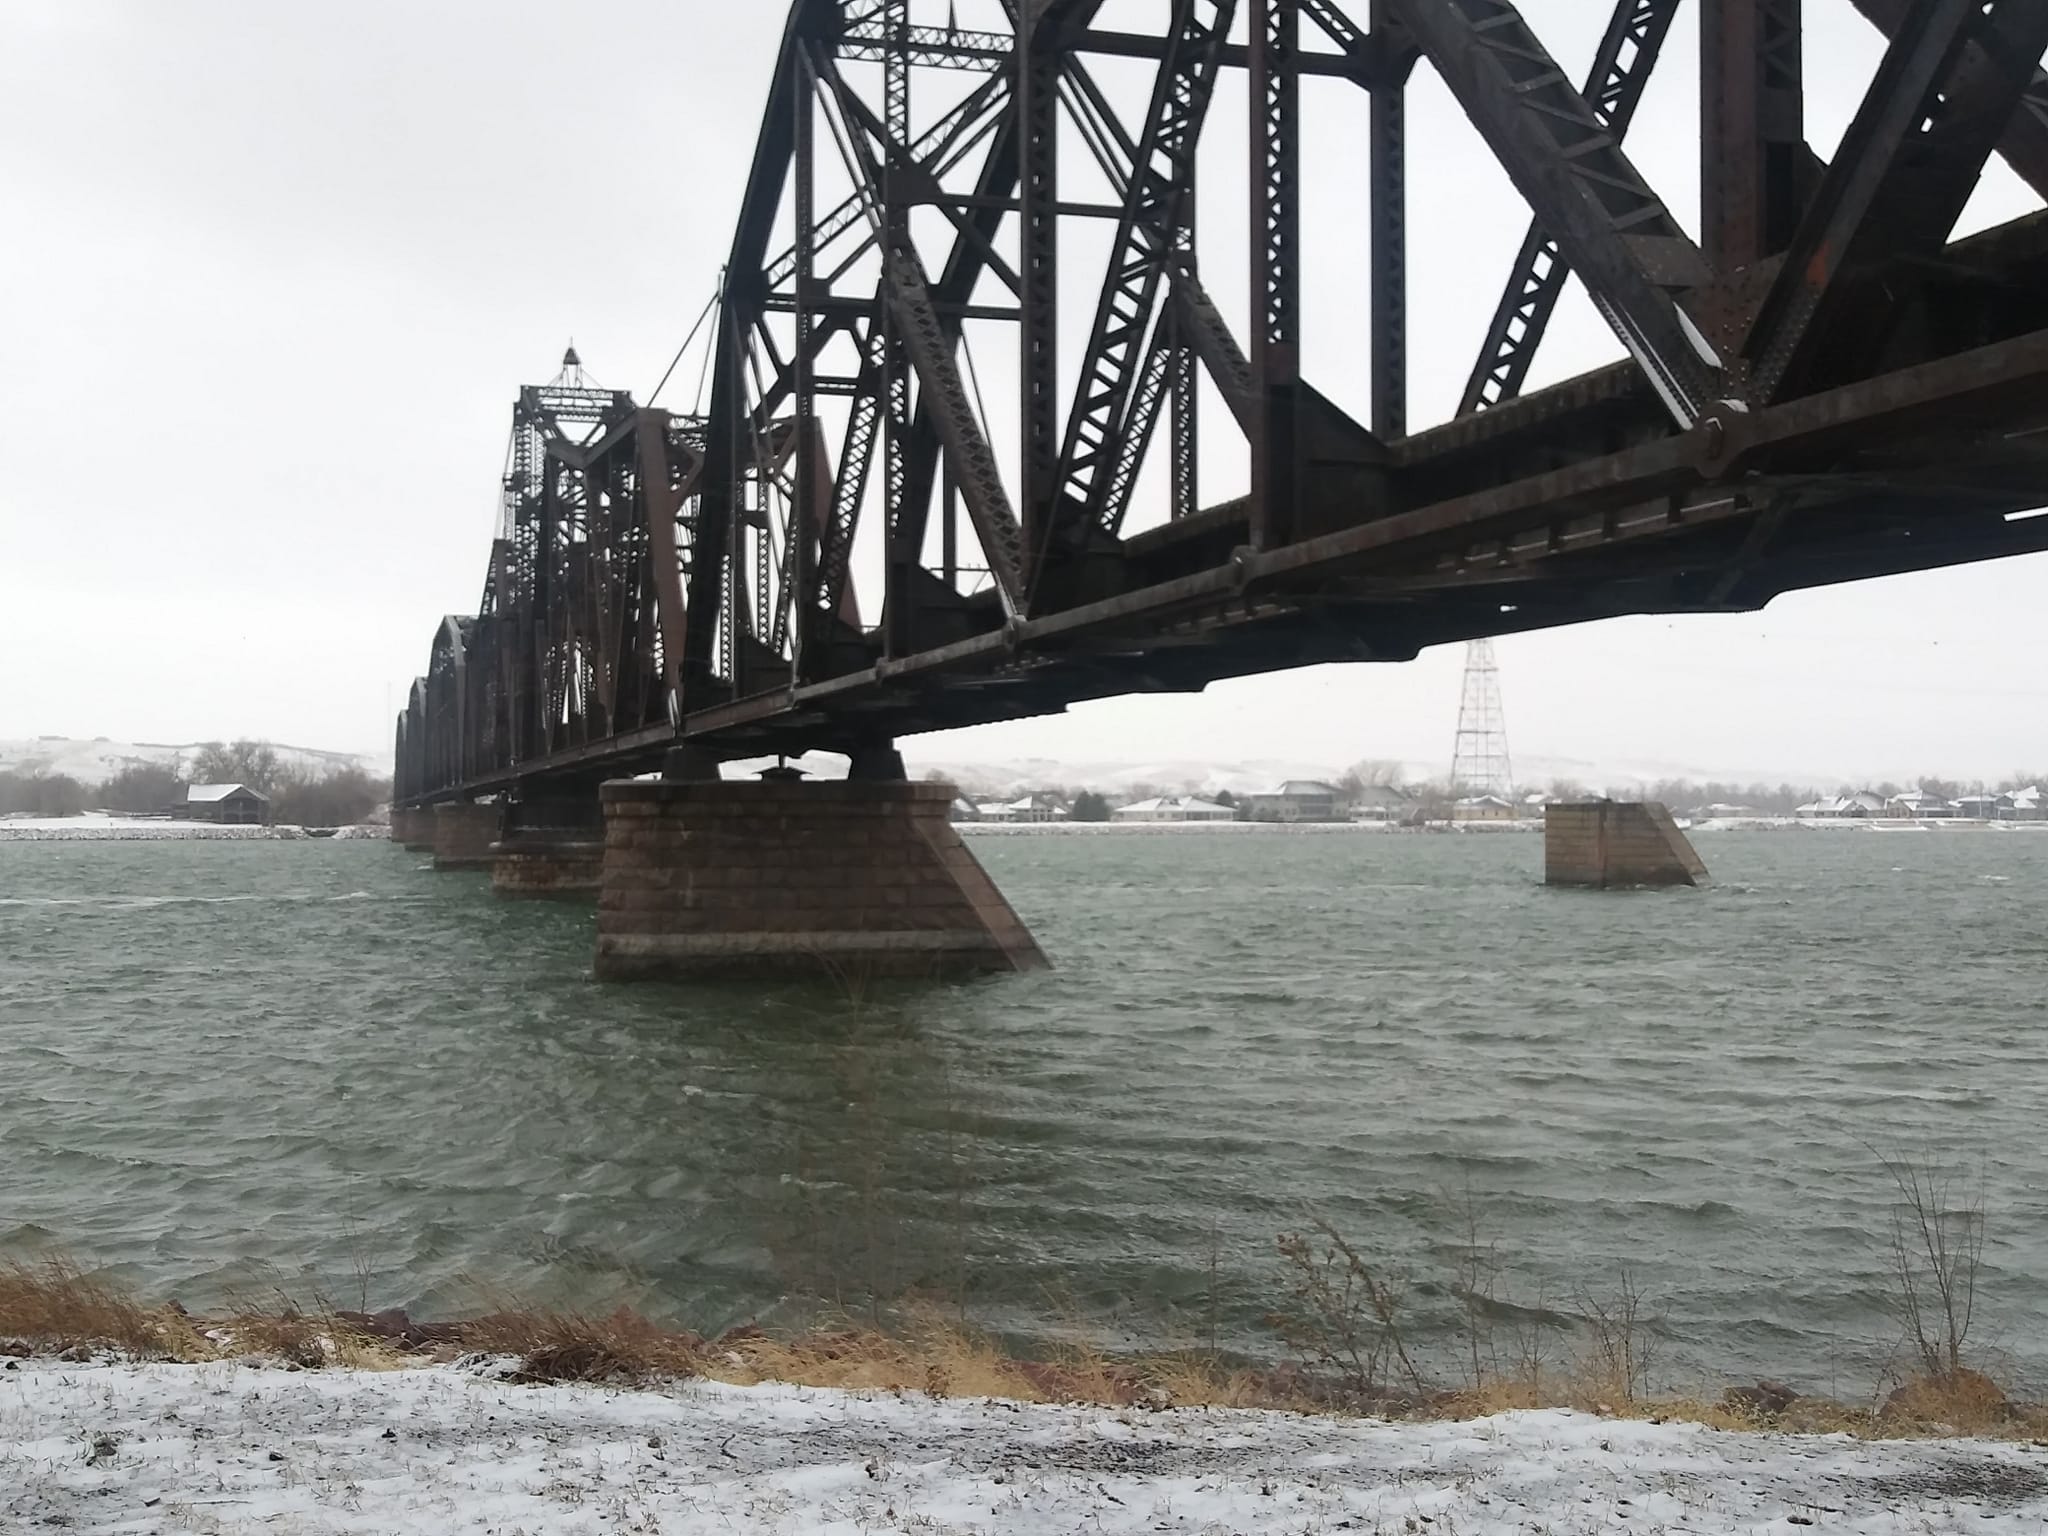 Police, Fire Officials Work To Bring Person Off And Away From Railroad Trestle Over Missouri River